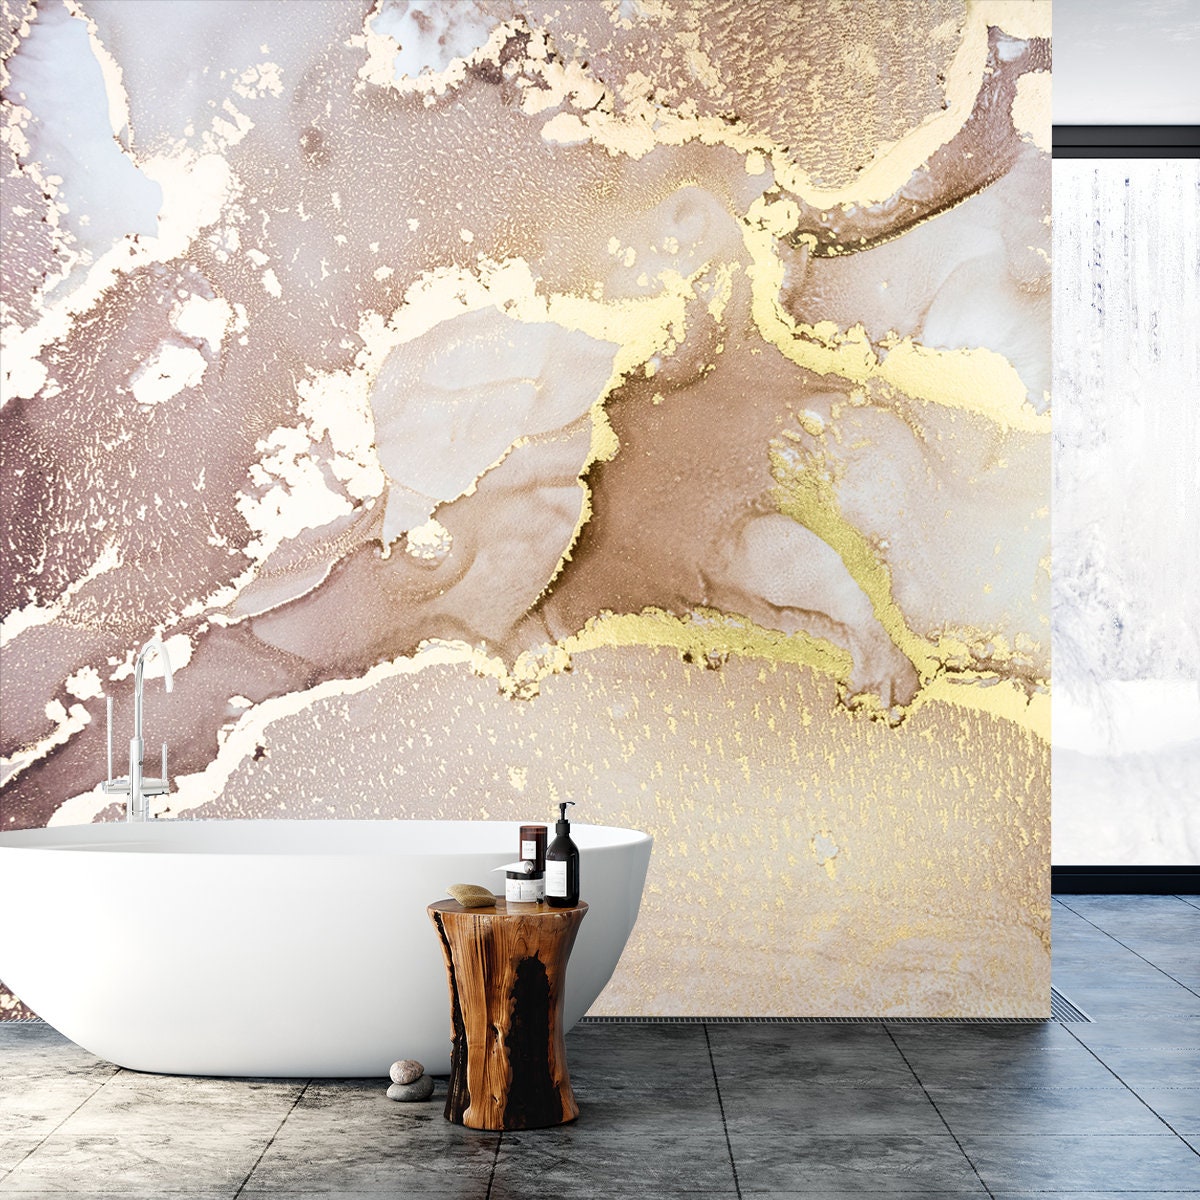 Luxury Abstract Fluid Art Painting in Alcohol Ink Technique, Mixture of Pastel Brown and Gold Paints Wallpaper Bathroom Mural